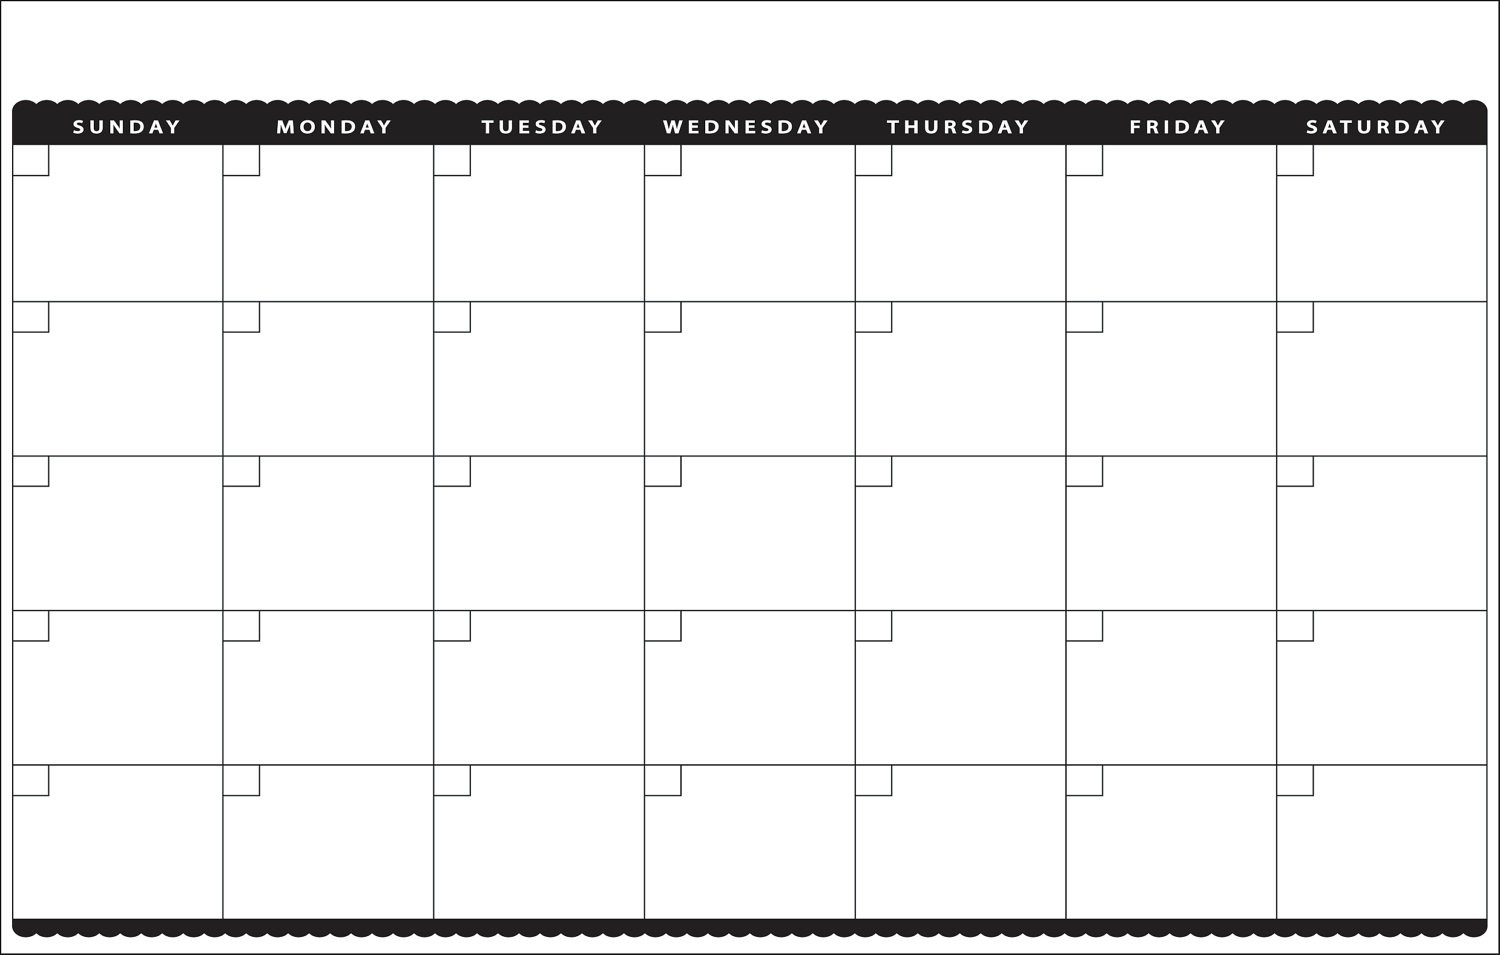 Awesome Month At A Glance Calendar Printable | Free